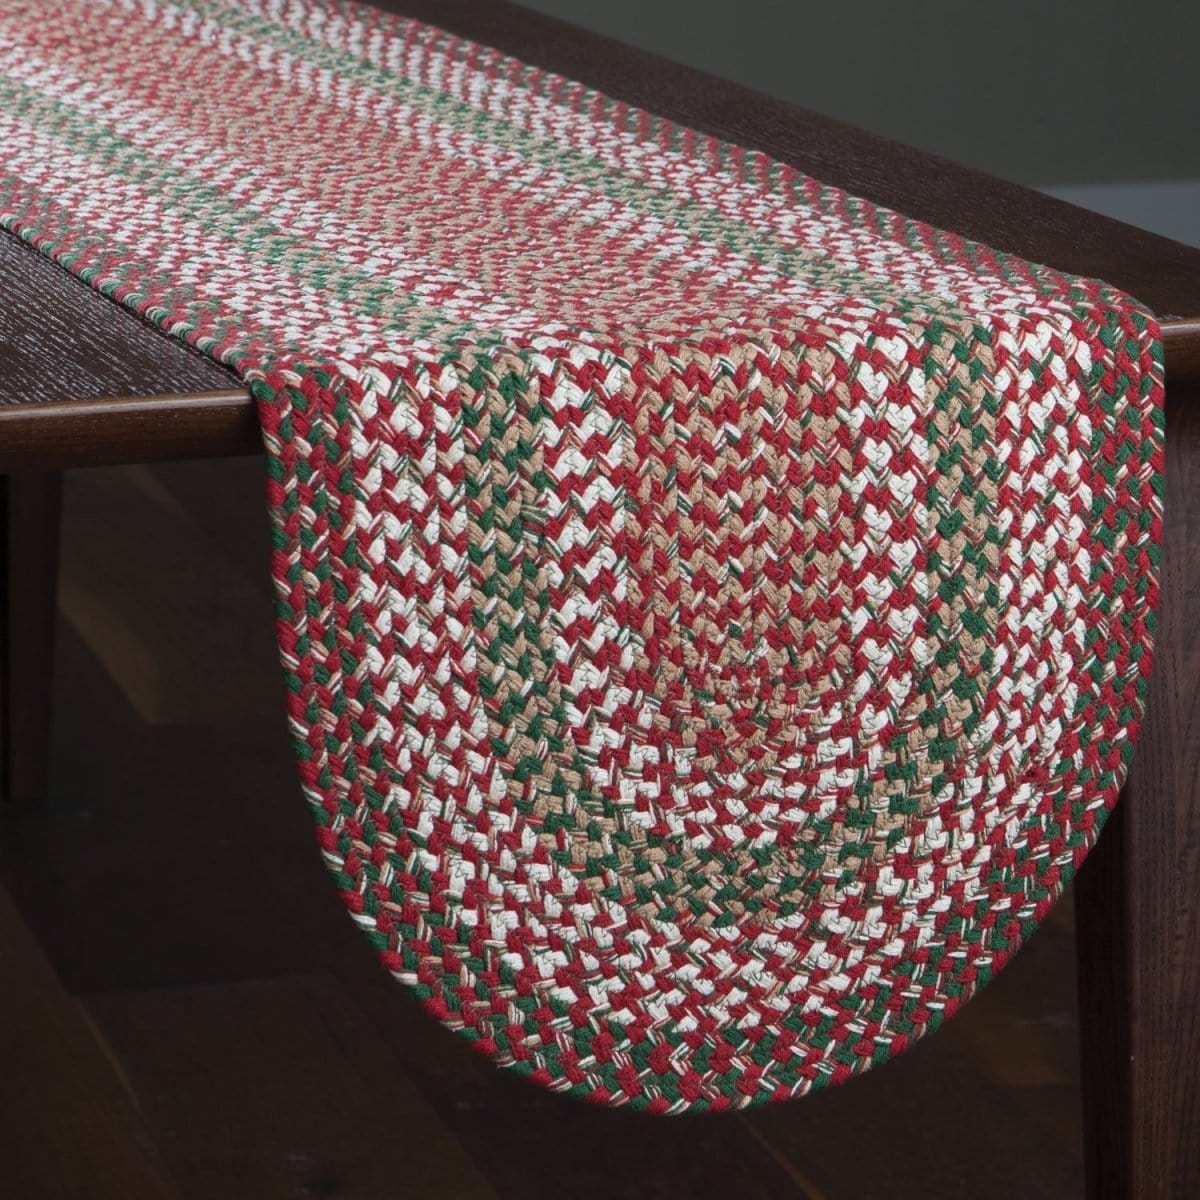 Holly Berry Braided Table Runner 54" Long-Park Designs-The Village Merchant